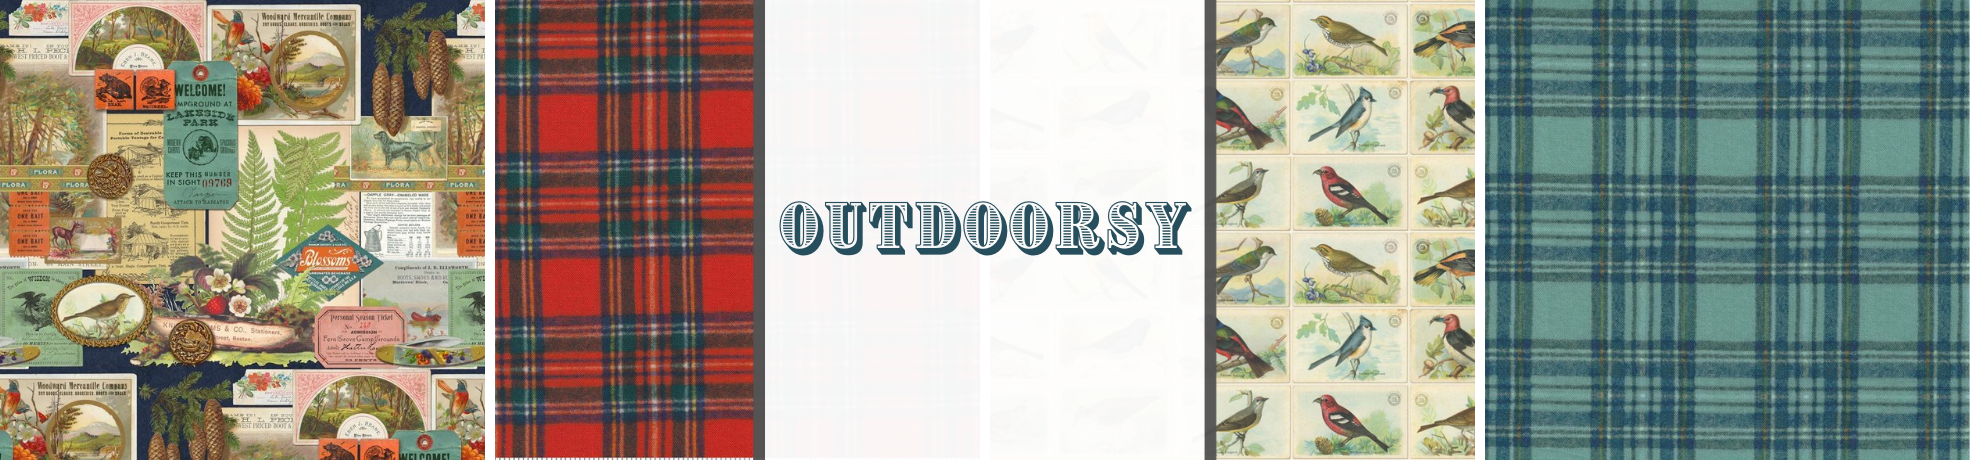 Outdoorsy Fabric Collection